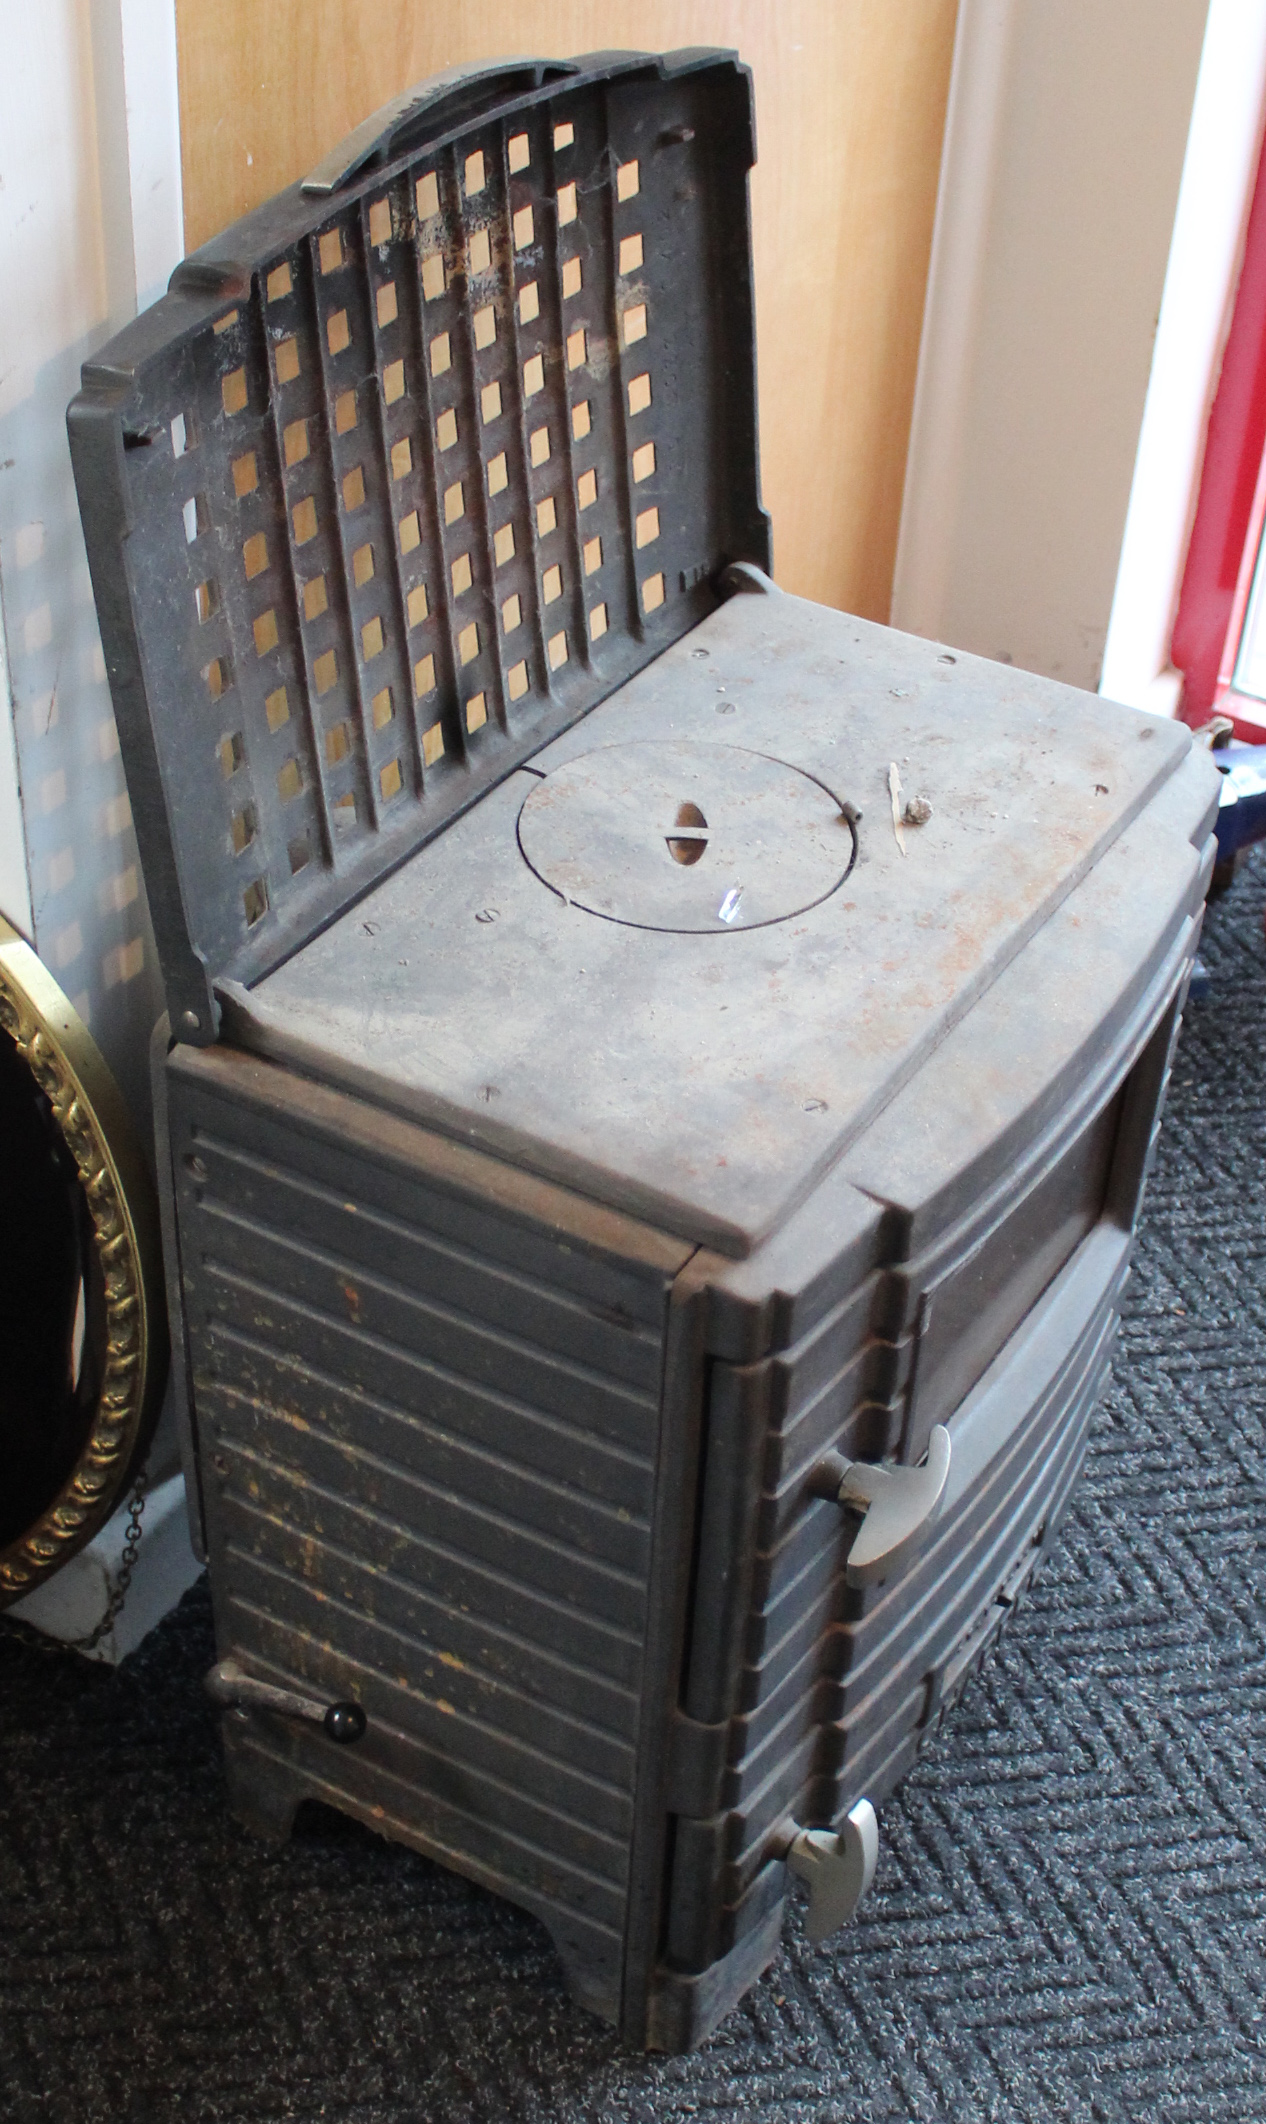 A Chappee wood-burning stove (No. 8033), in cast iron case, 19” wide x 22” high. - Image 2 of 3